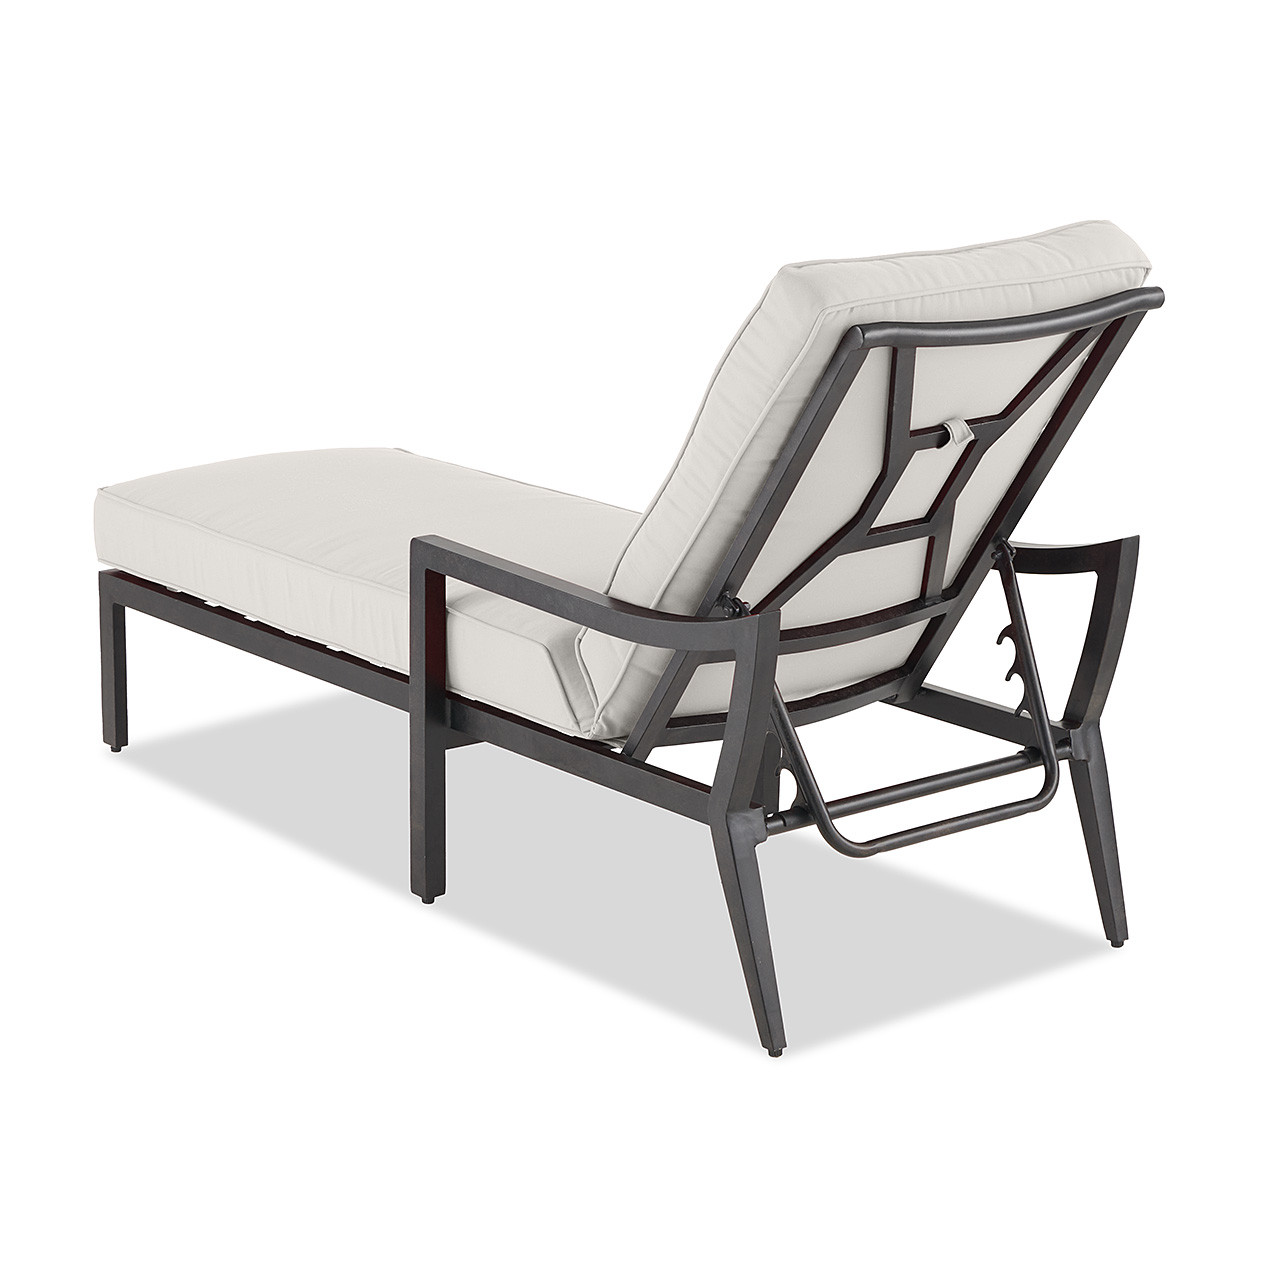 Hill Country Aged Bronze Aluminum with Cushions Chaise Lounge